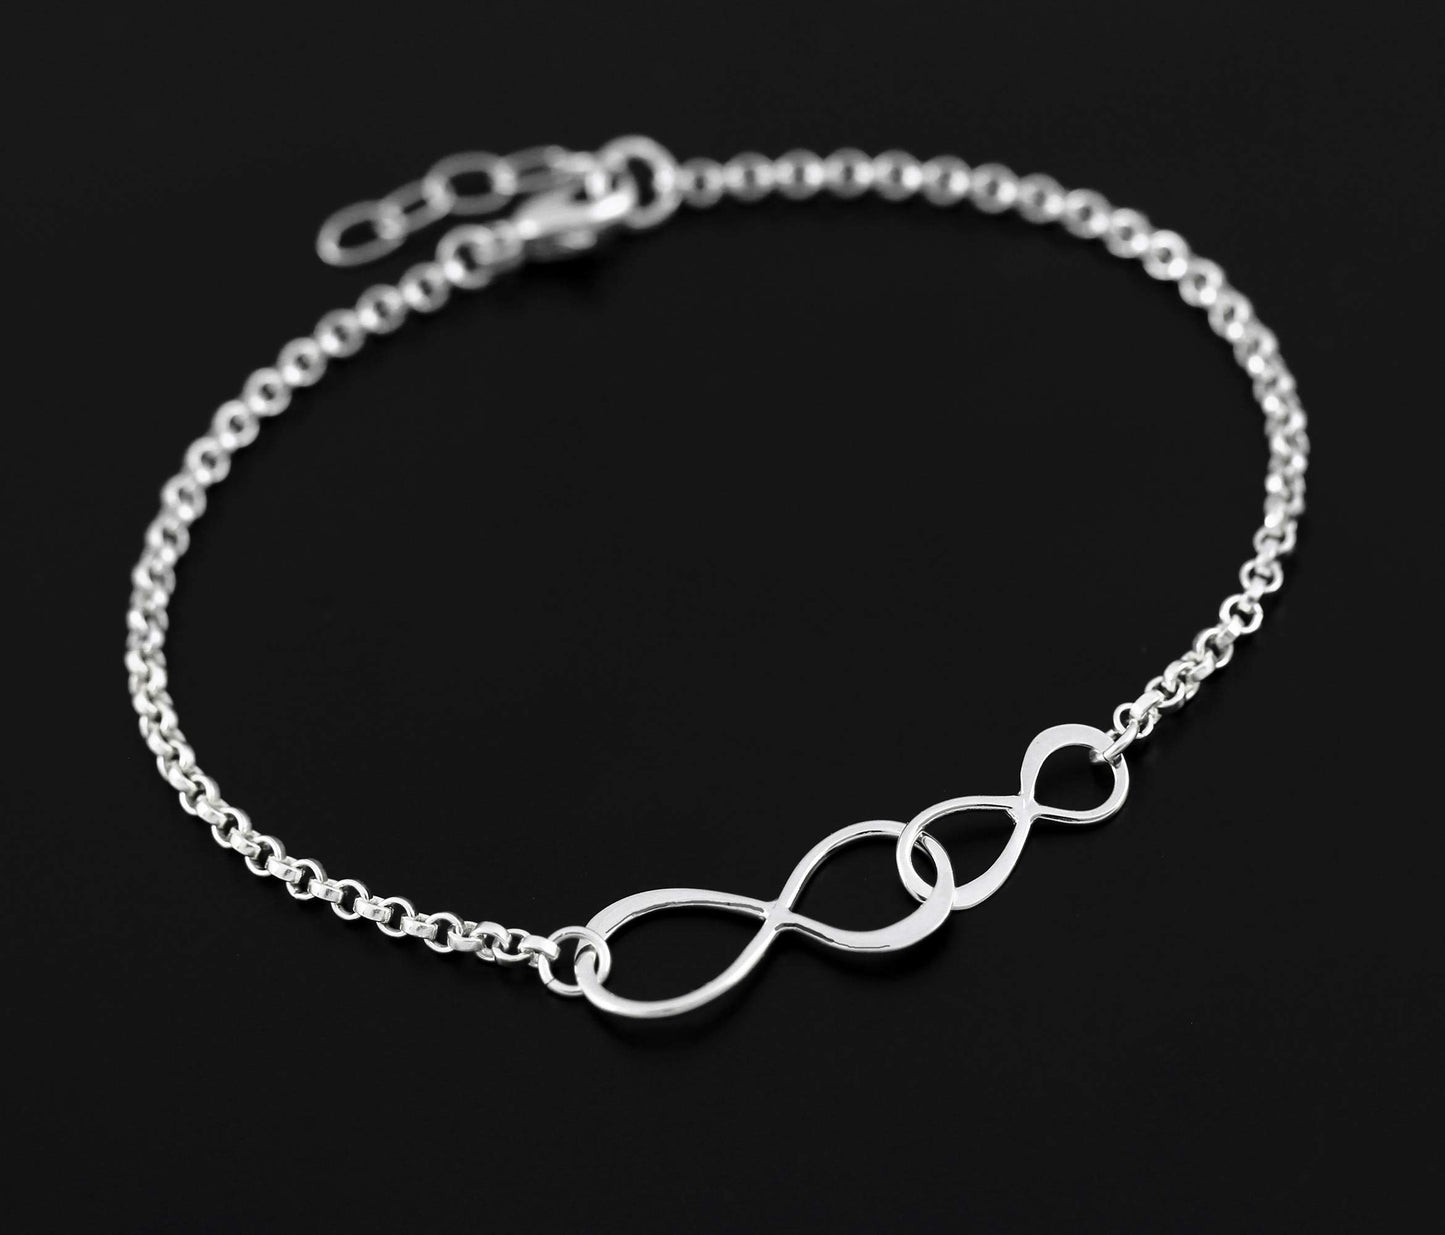 Grandmother Granddaughter Bracelet • Handmade Sterling Silver Bracelet • Two Connected Infinity Bracelet • 2 Infinity • Eternity Circles • Gifts for Grandma Adult Granddaughter • Meaningful Jewelry